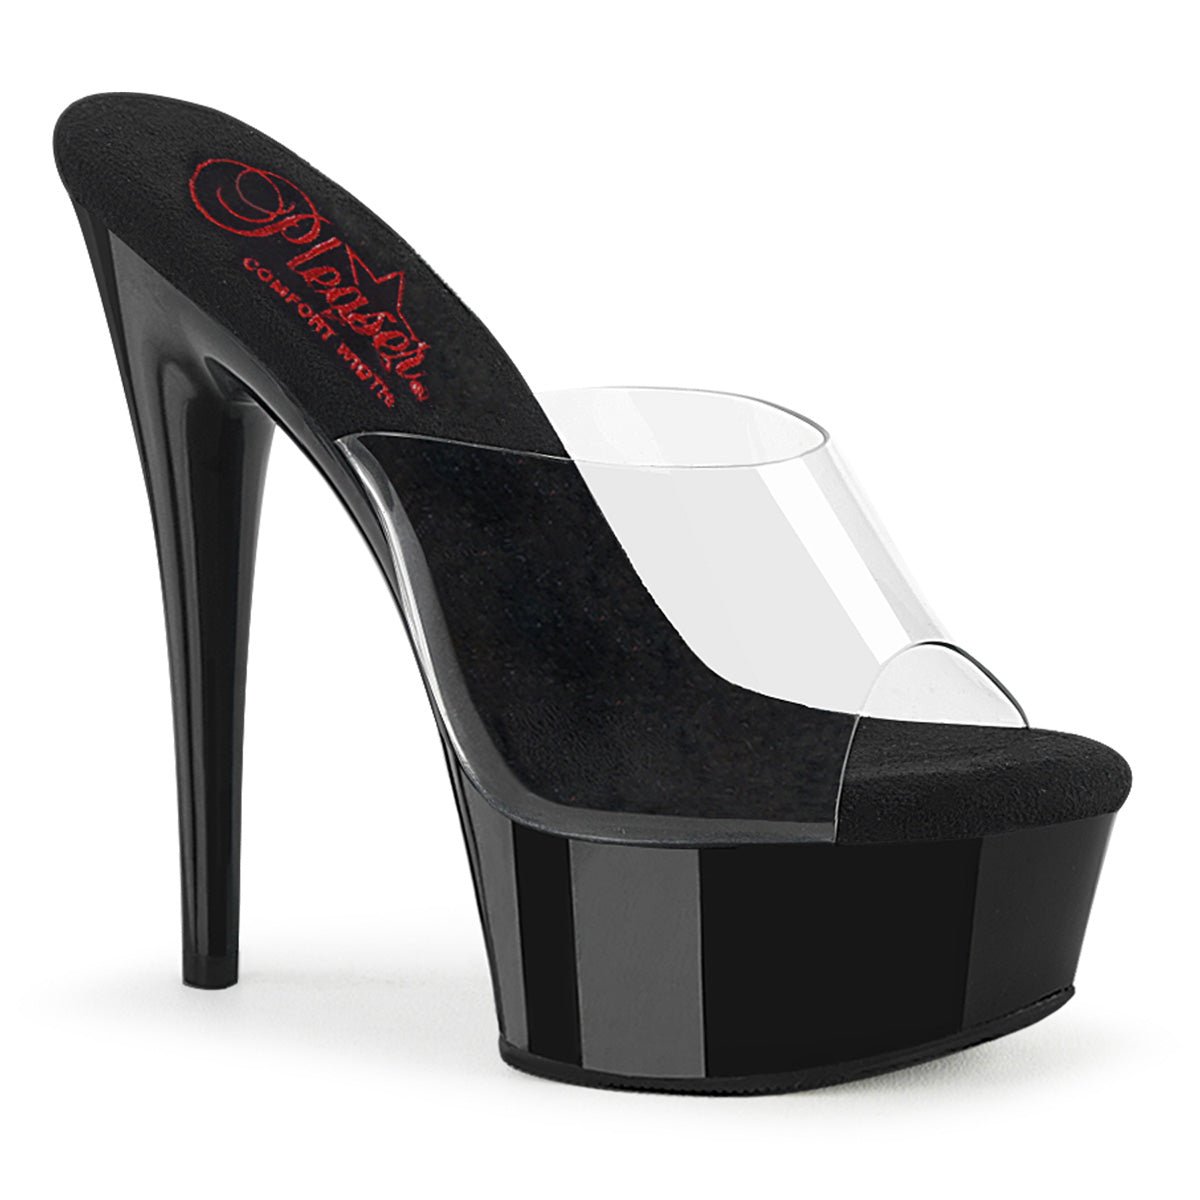 Pleaser EXCITE 601 - From Pleaser Sold By Alternative Footwear